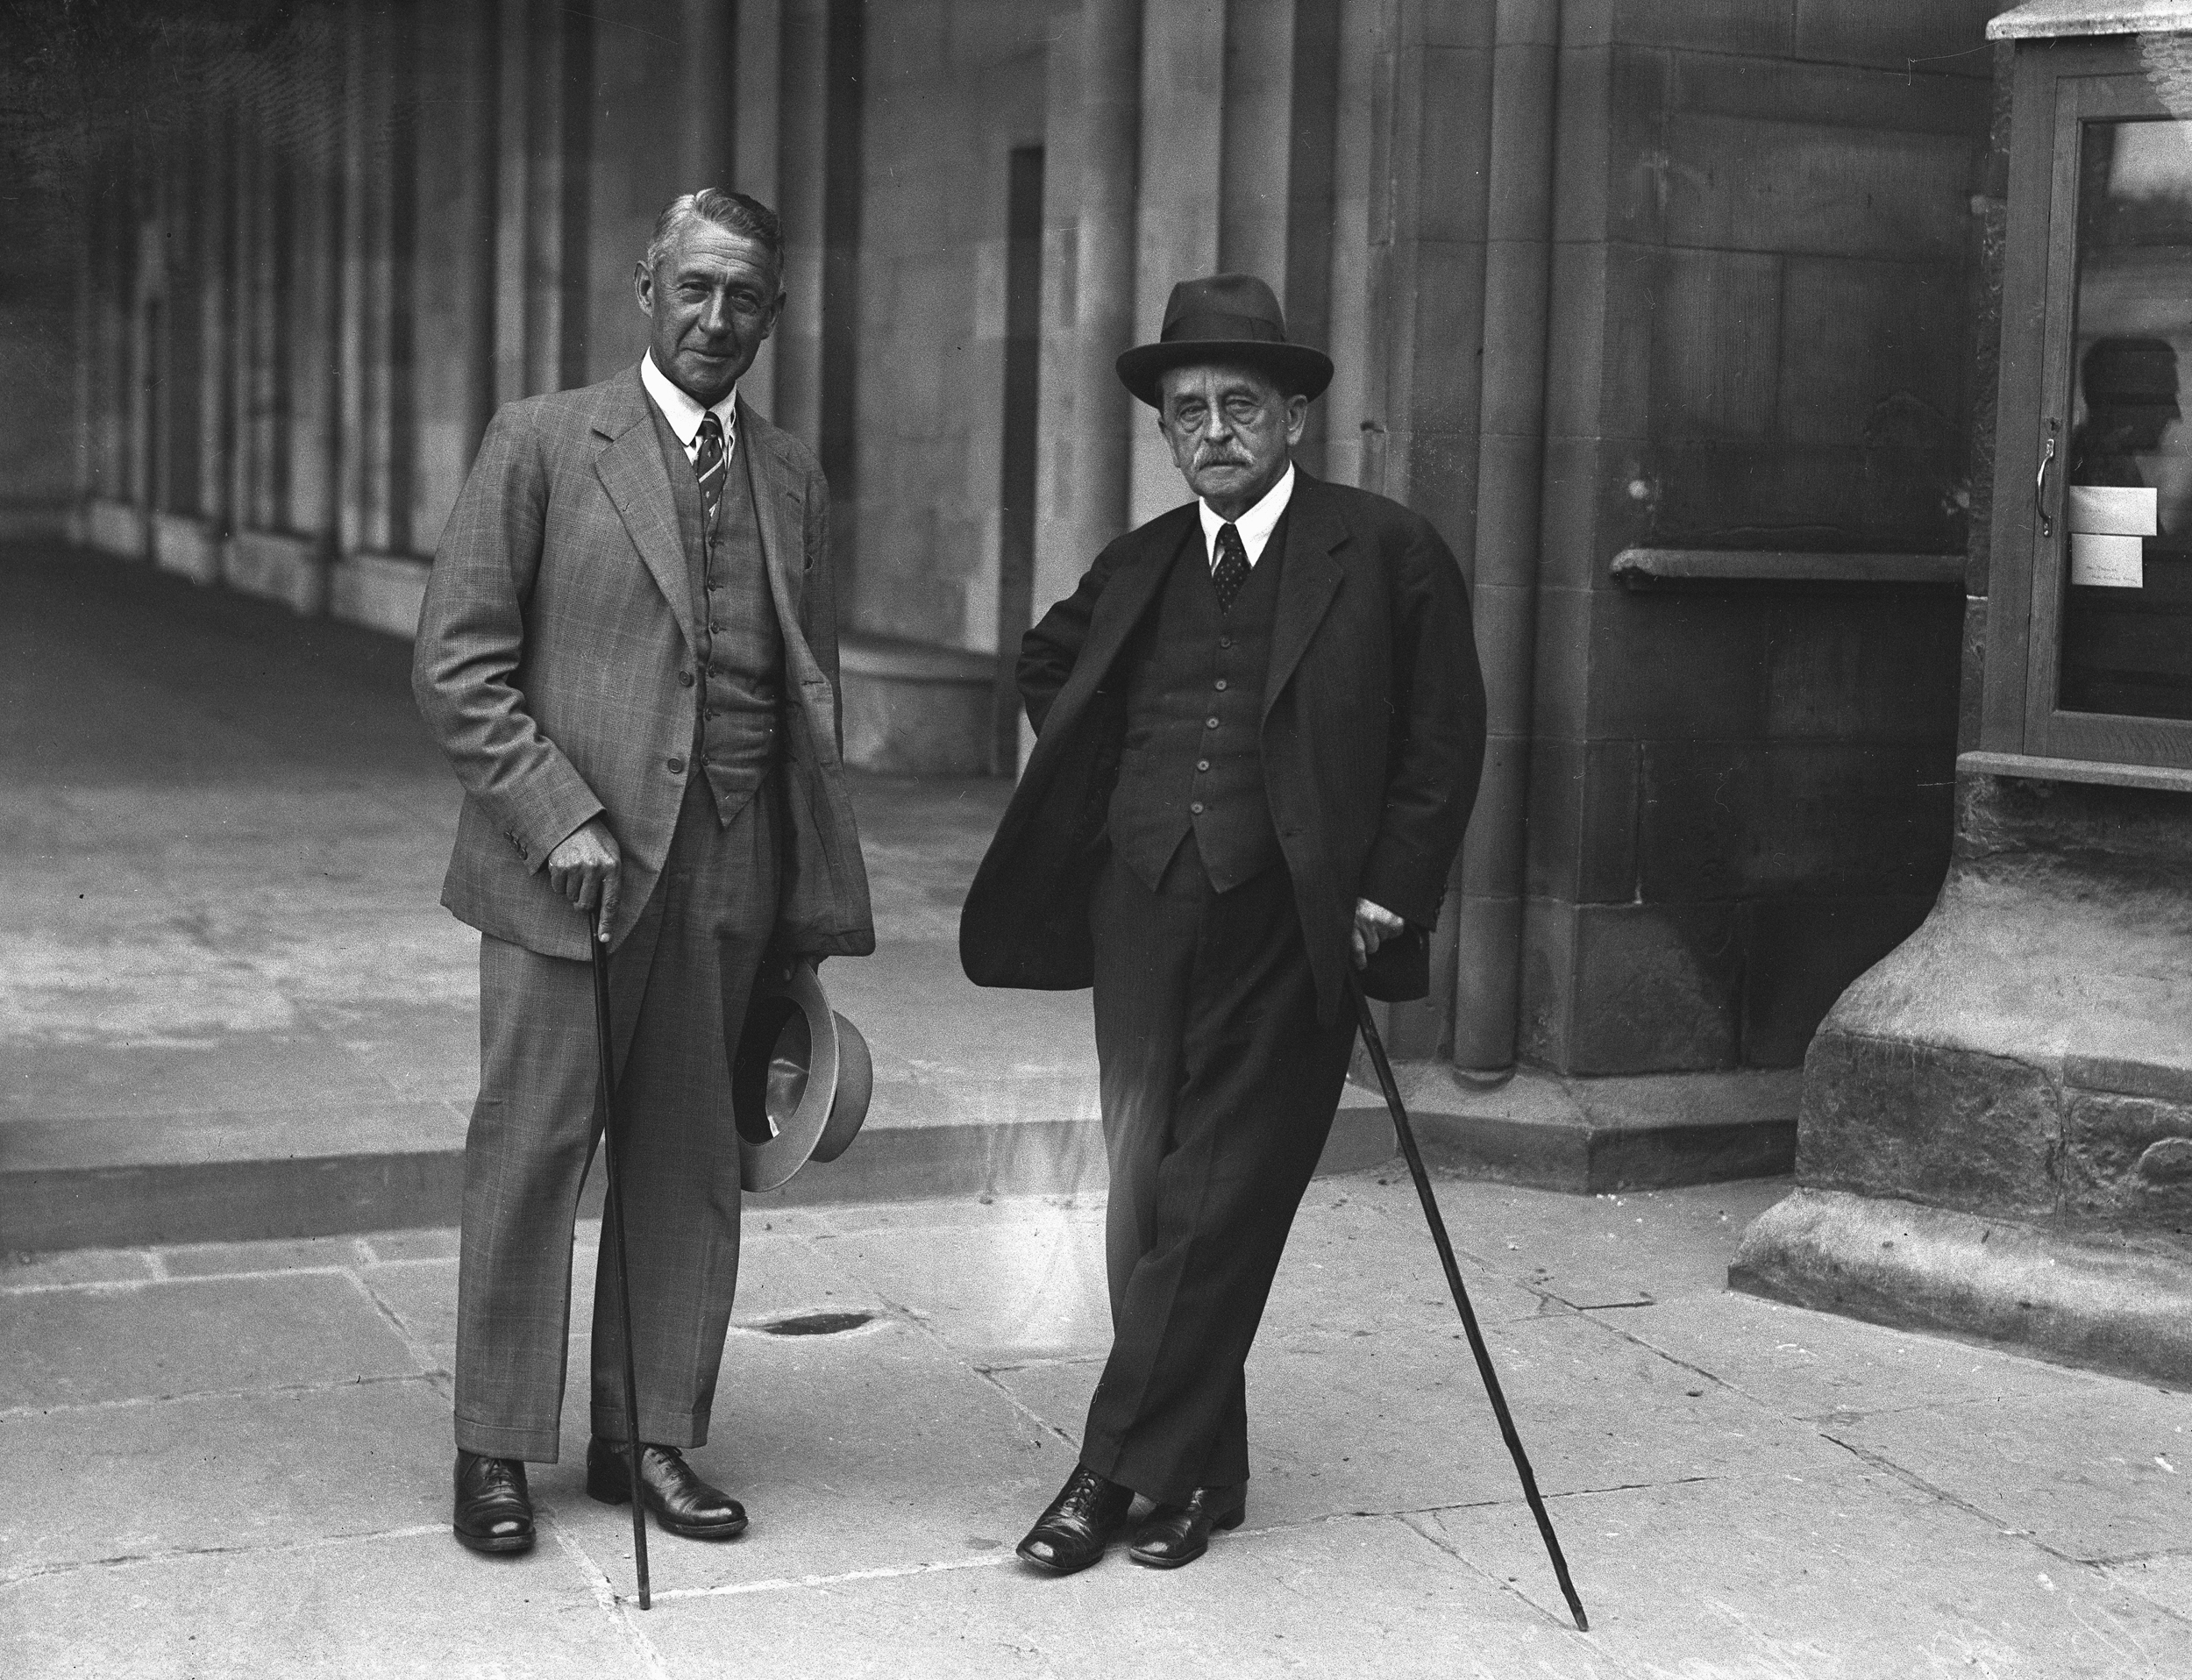 Barrie (right), seen here with St Andrews Principal Sir James Colquhoun Irvine outside St. Salvator’s chapel in 1919. (St Andrews Photographic Collection GMC-19-67)  